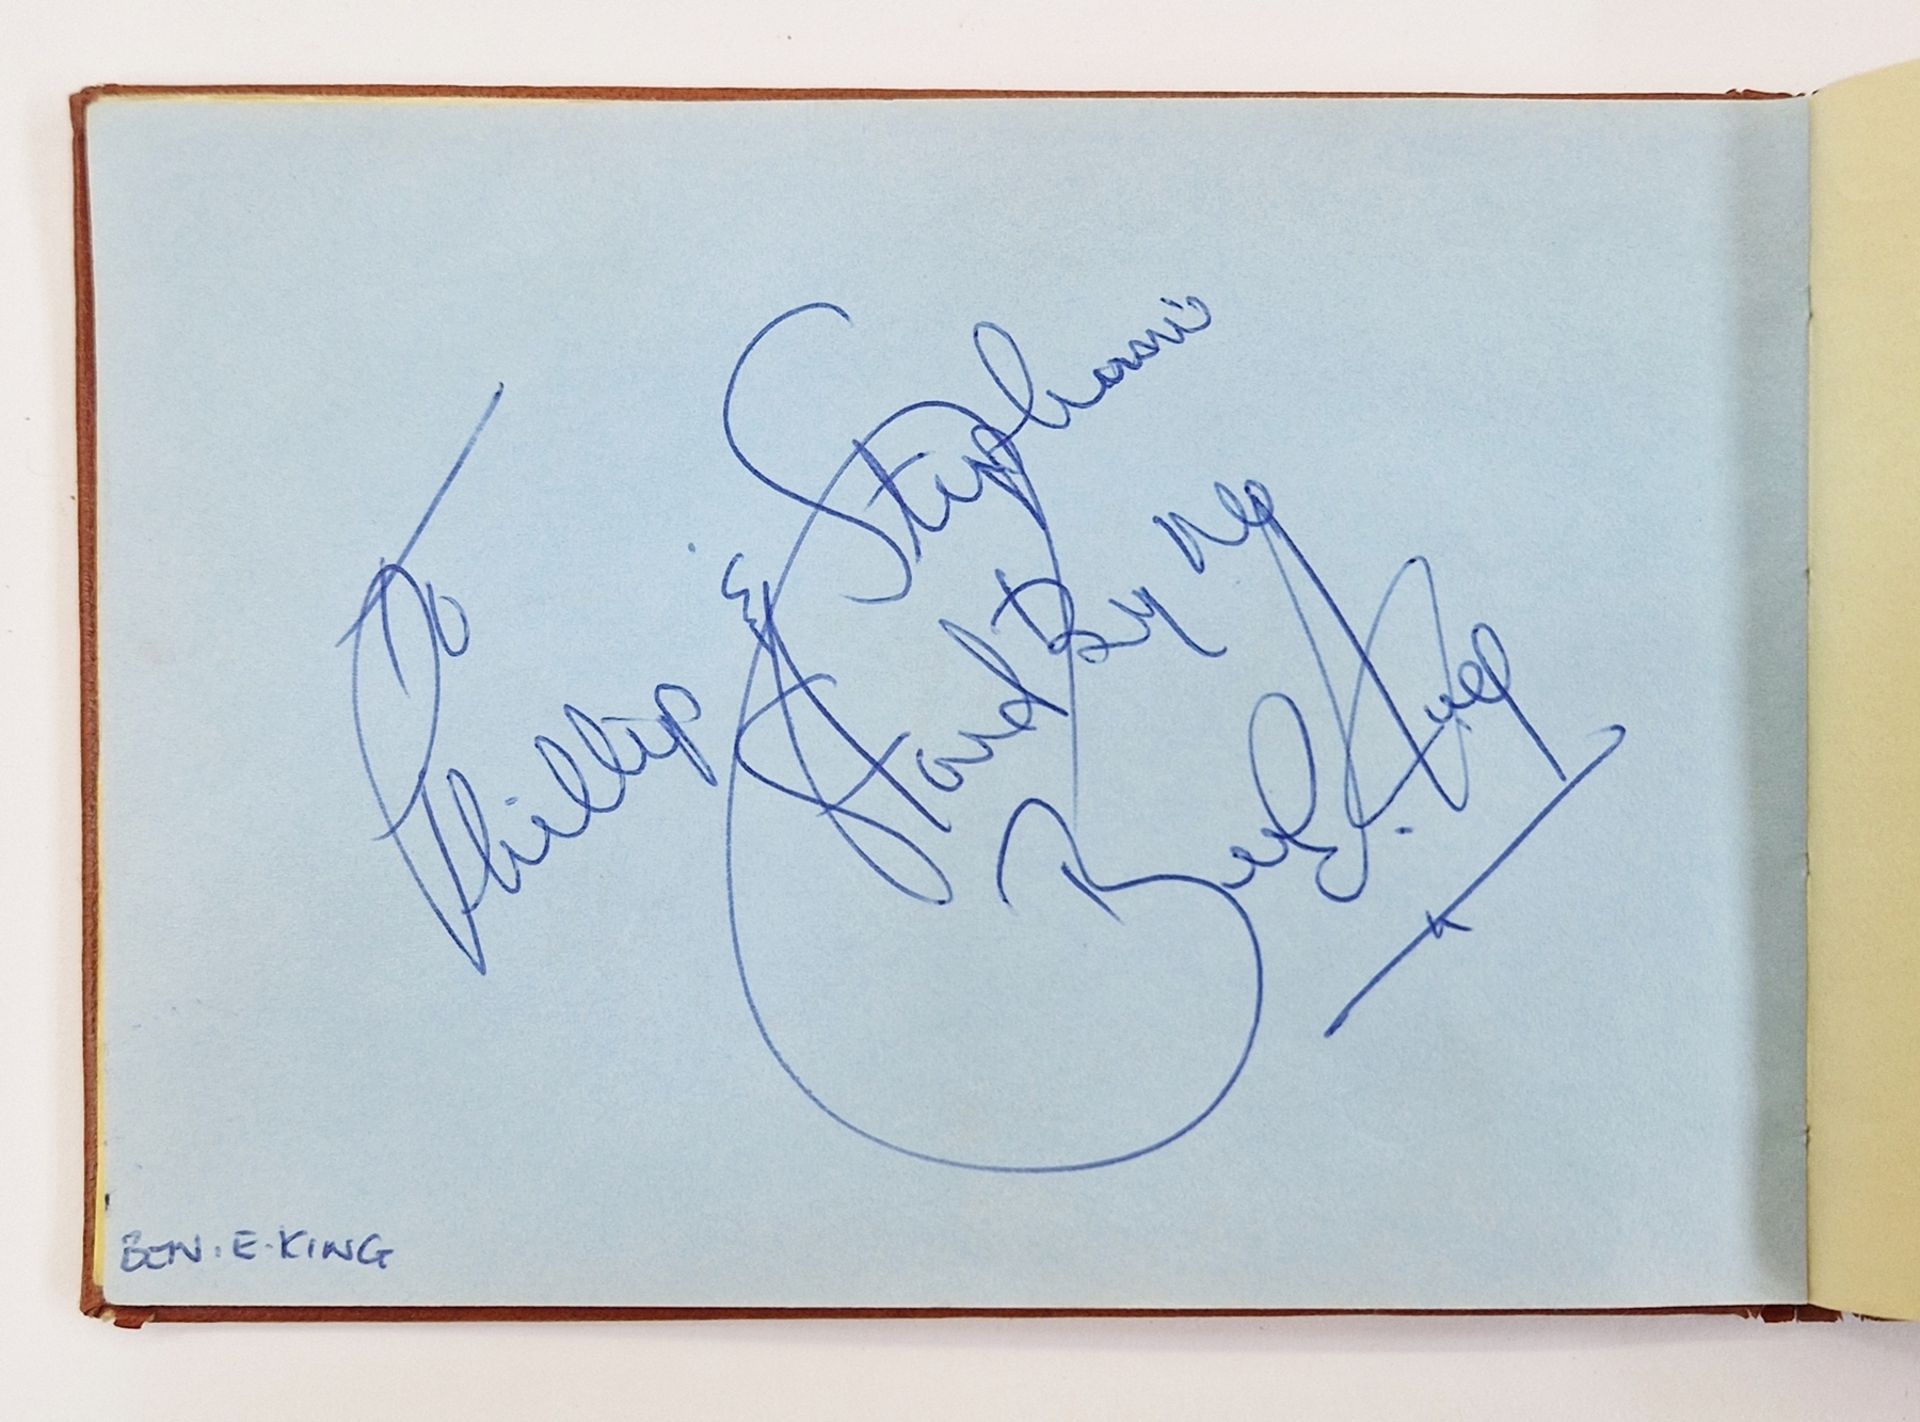 Autograph album, 20th century, to include actors, singers and other celebrities, including Elton - Image 14 of 20